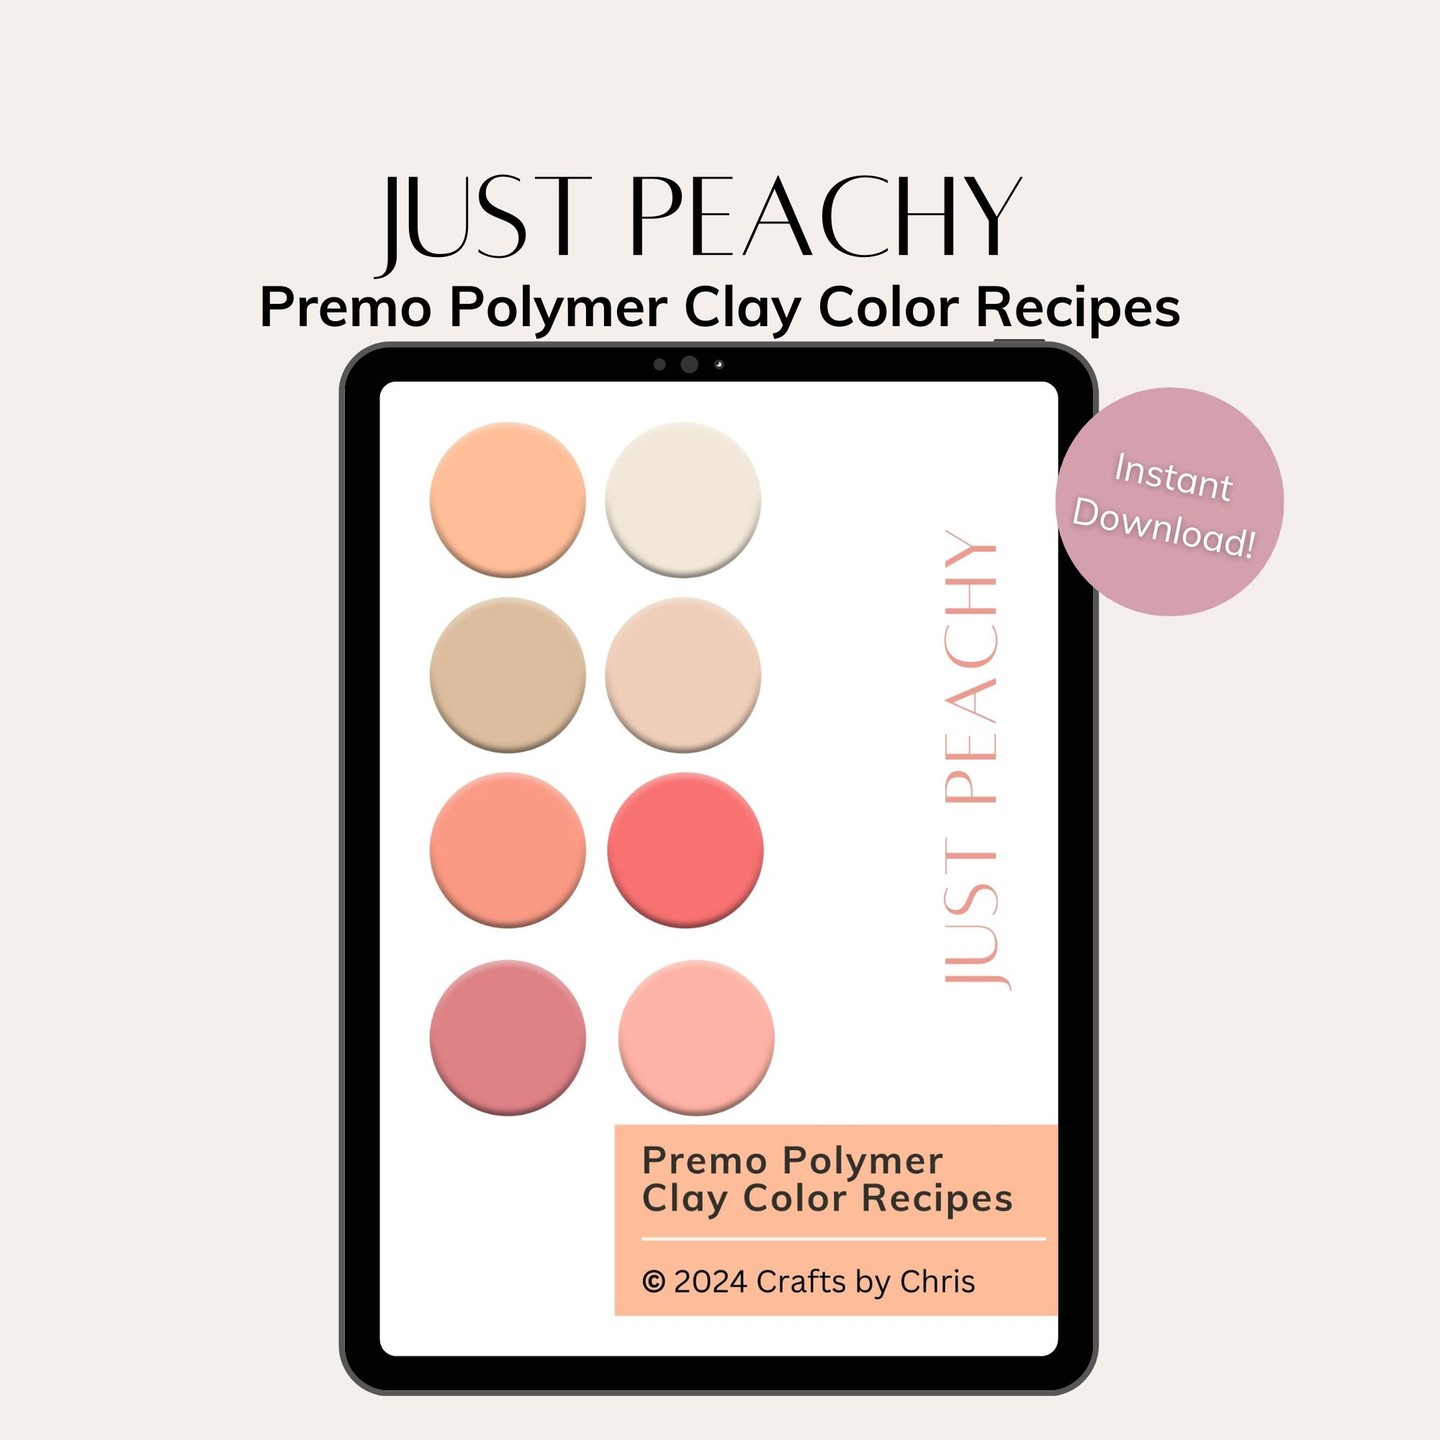 New Just Peachy color palette - premo polymer clay color recipes. link to shop in bio.

#polymerclay #polymerclaycolorre